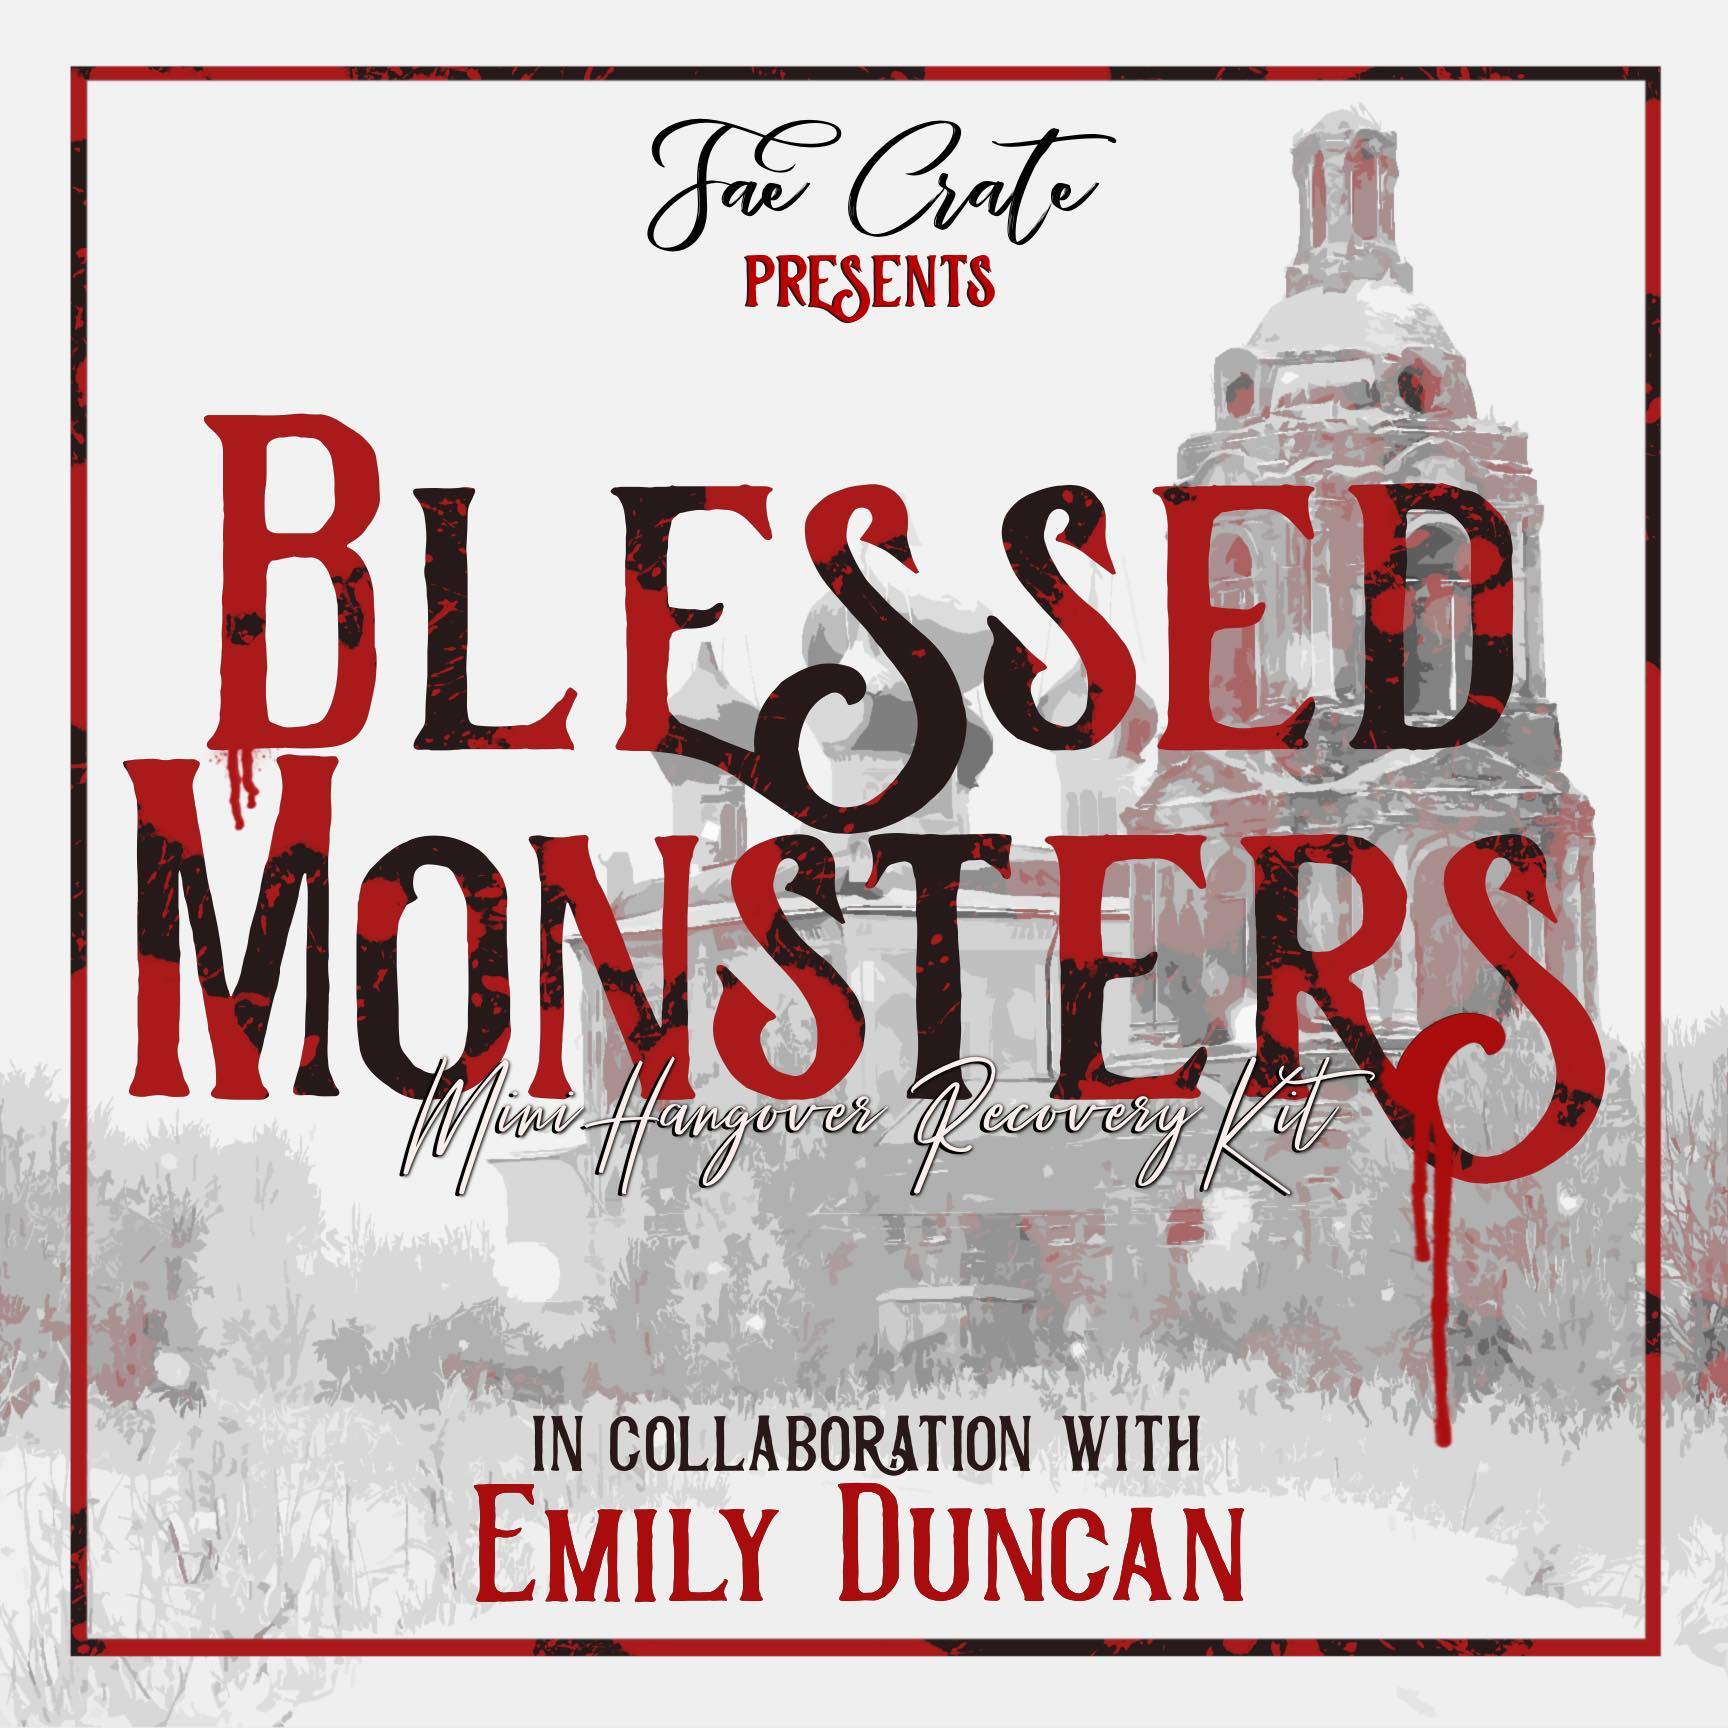 Fae Crate Presents Blessed Monsters Mini Hangover Recovery Kit in Collaboration with Emily Duncan